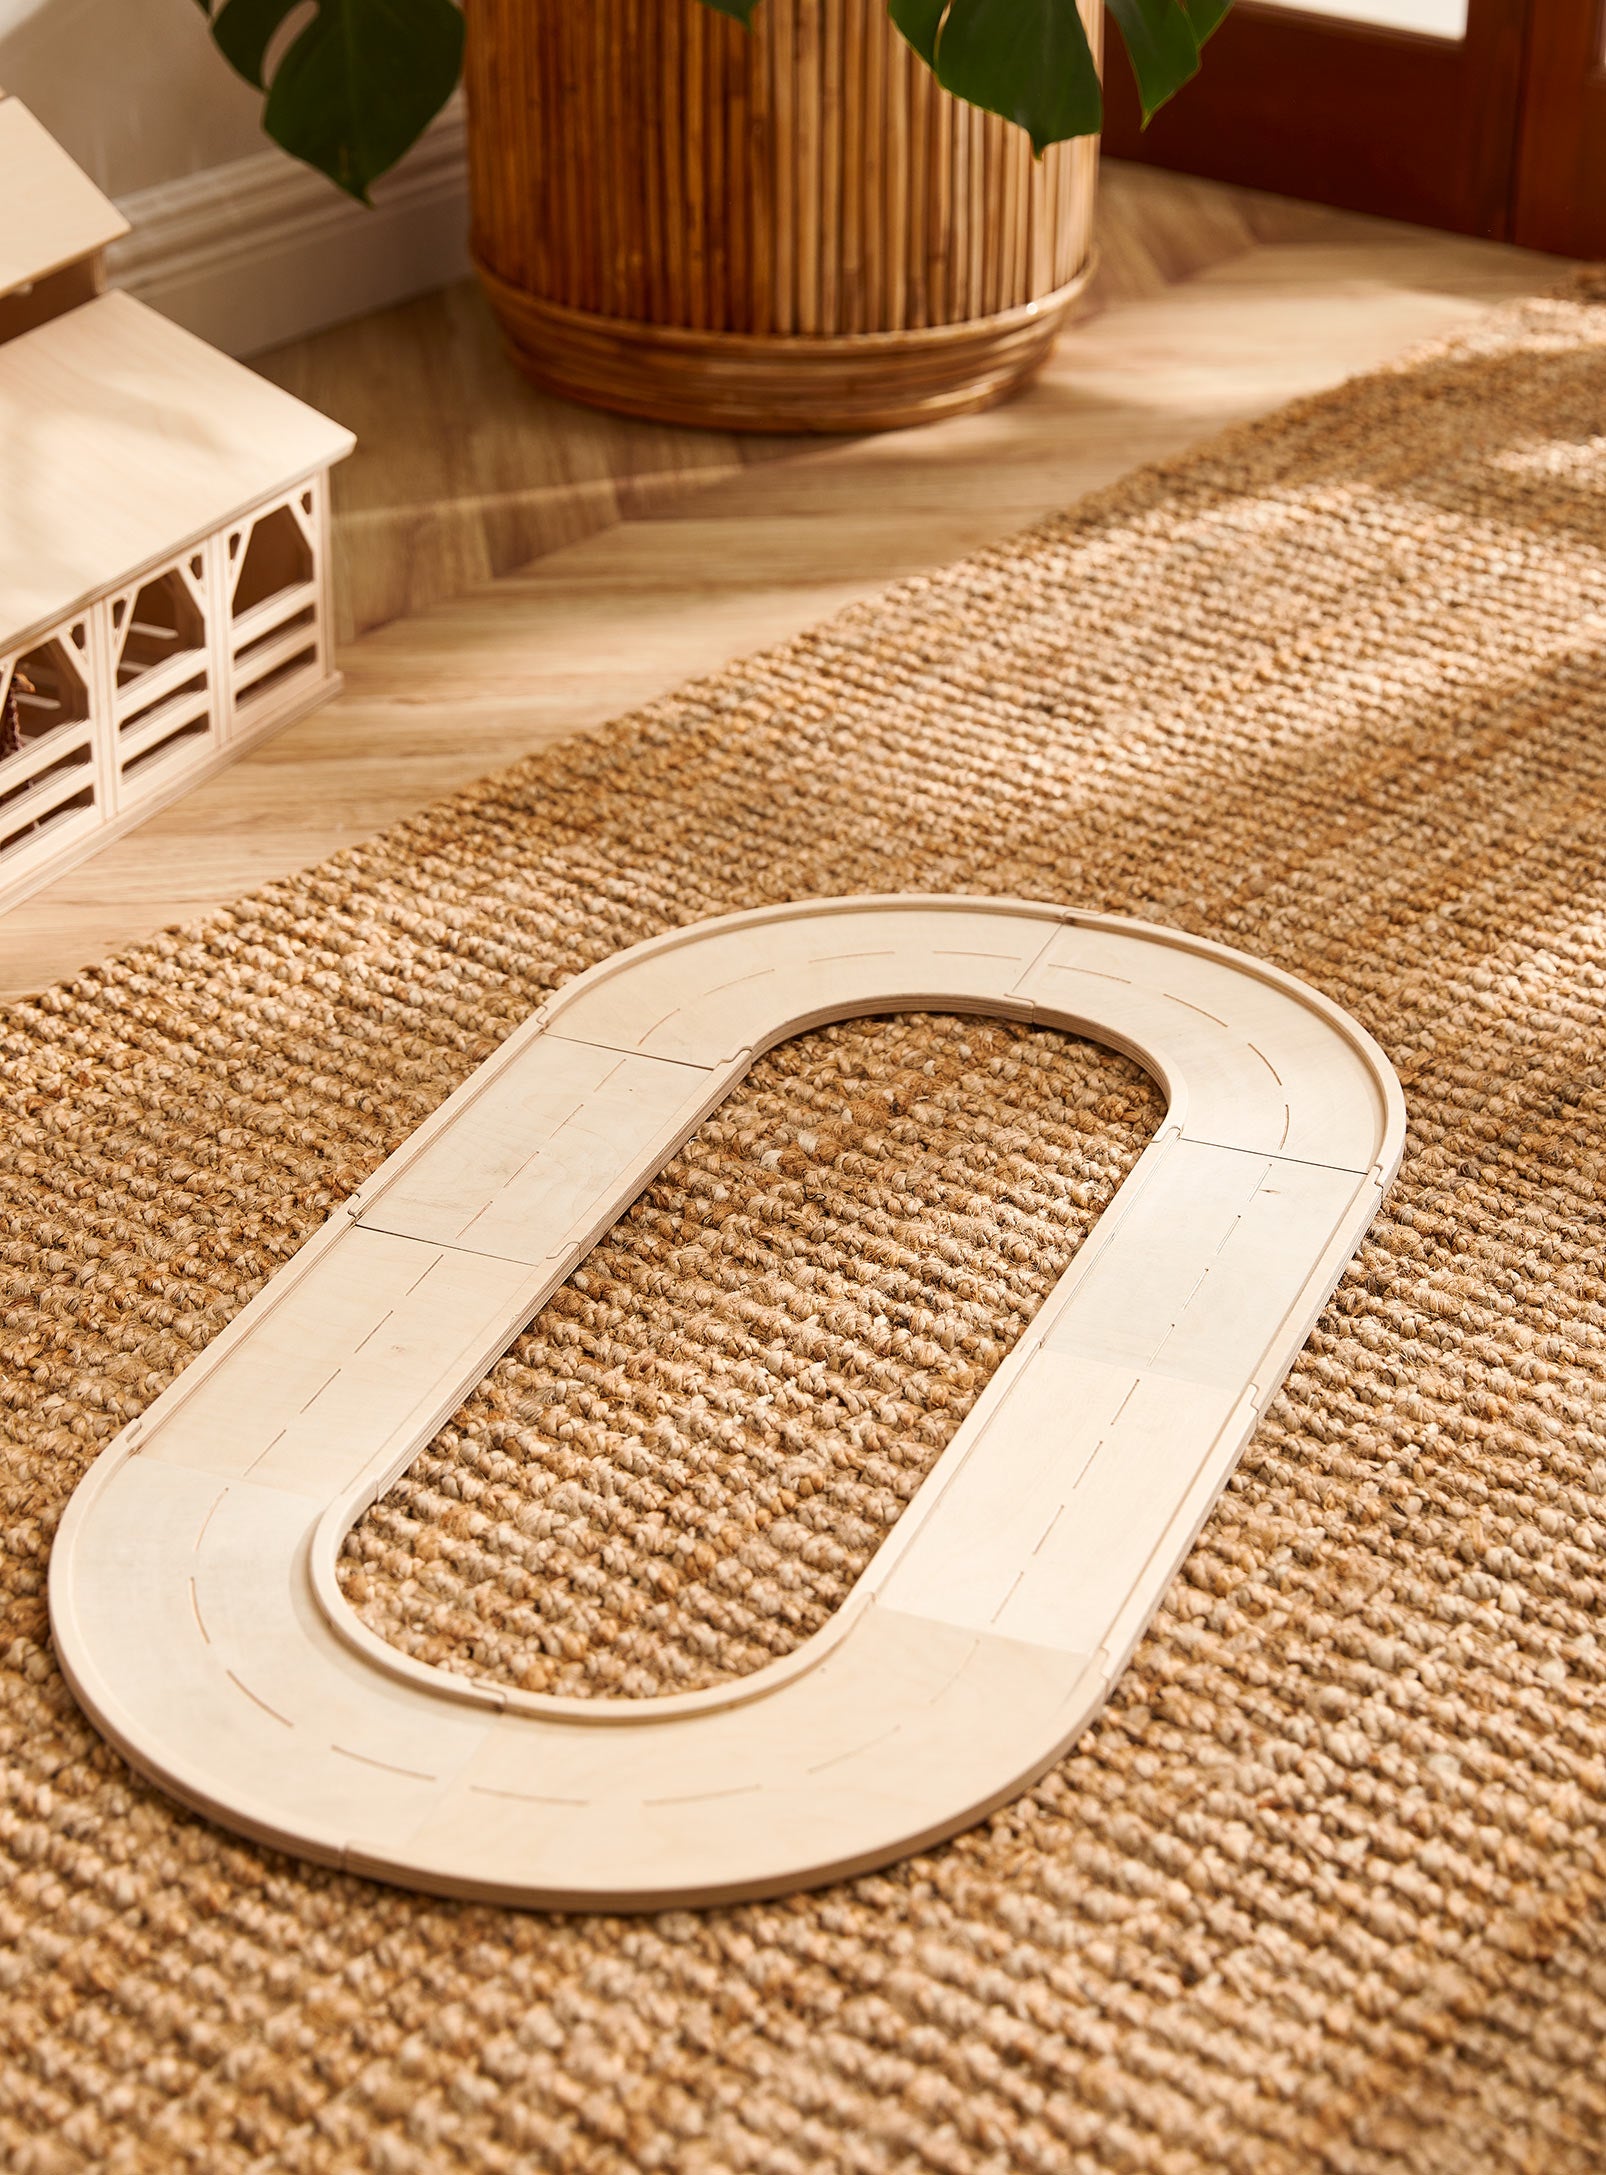 Oval Wooden Track